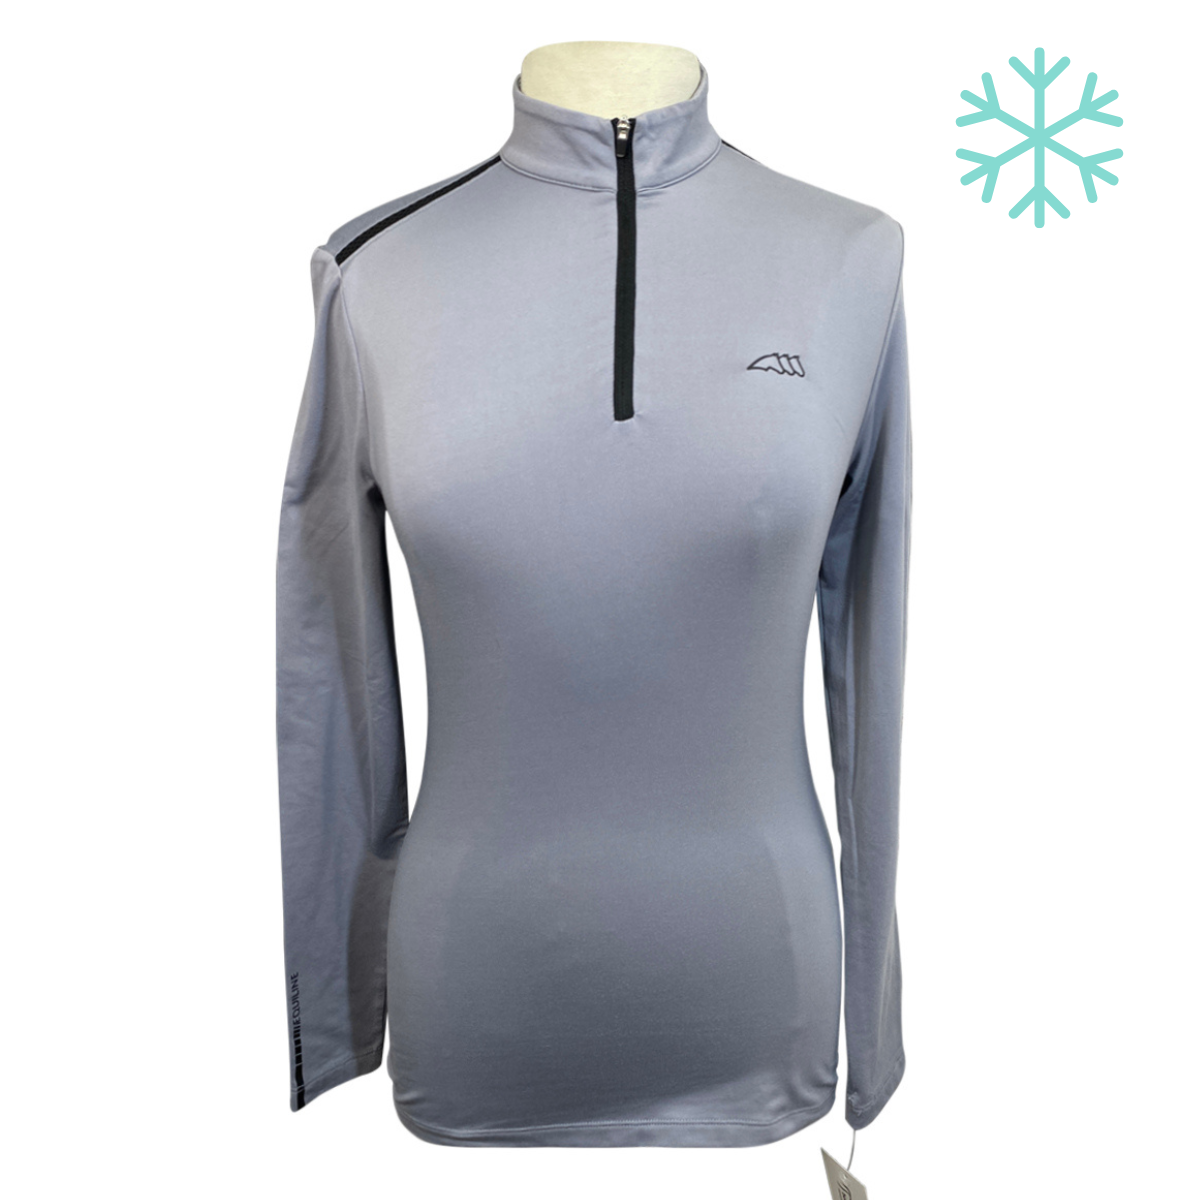 Equiline 'CamilC' Training Shirt in Grey